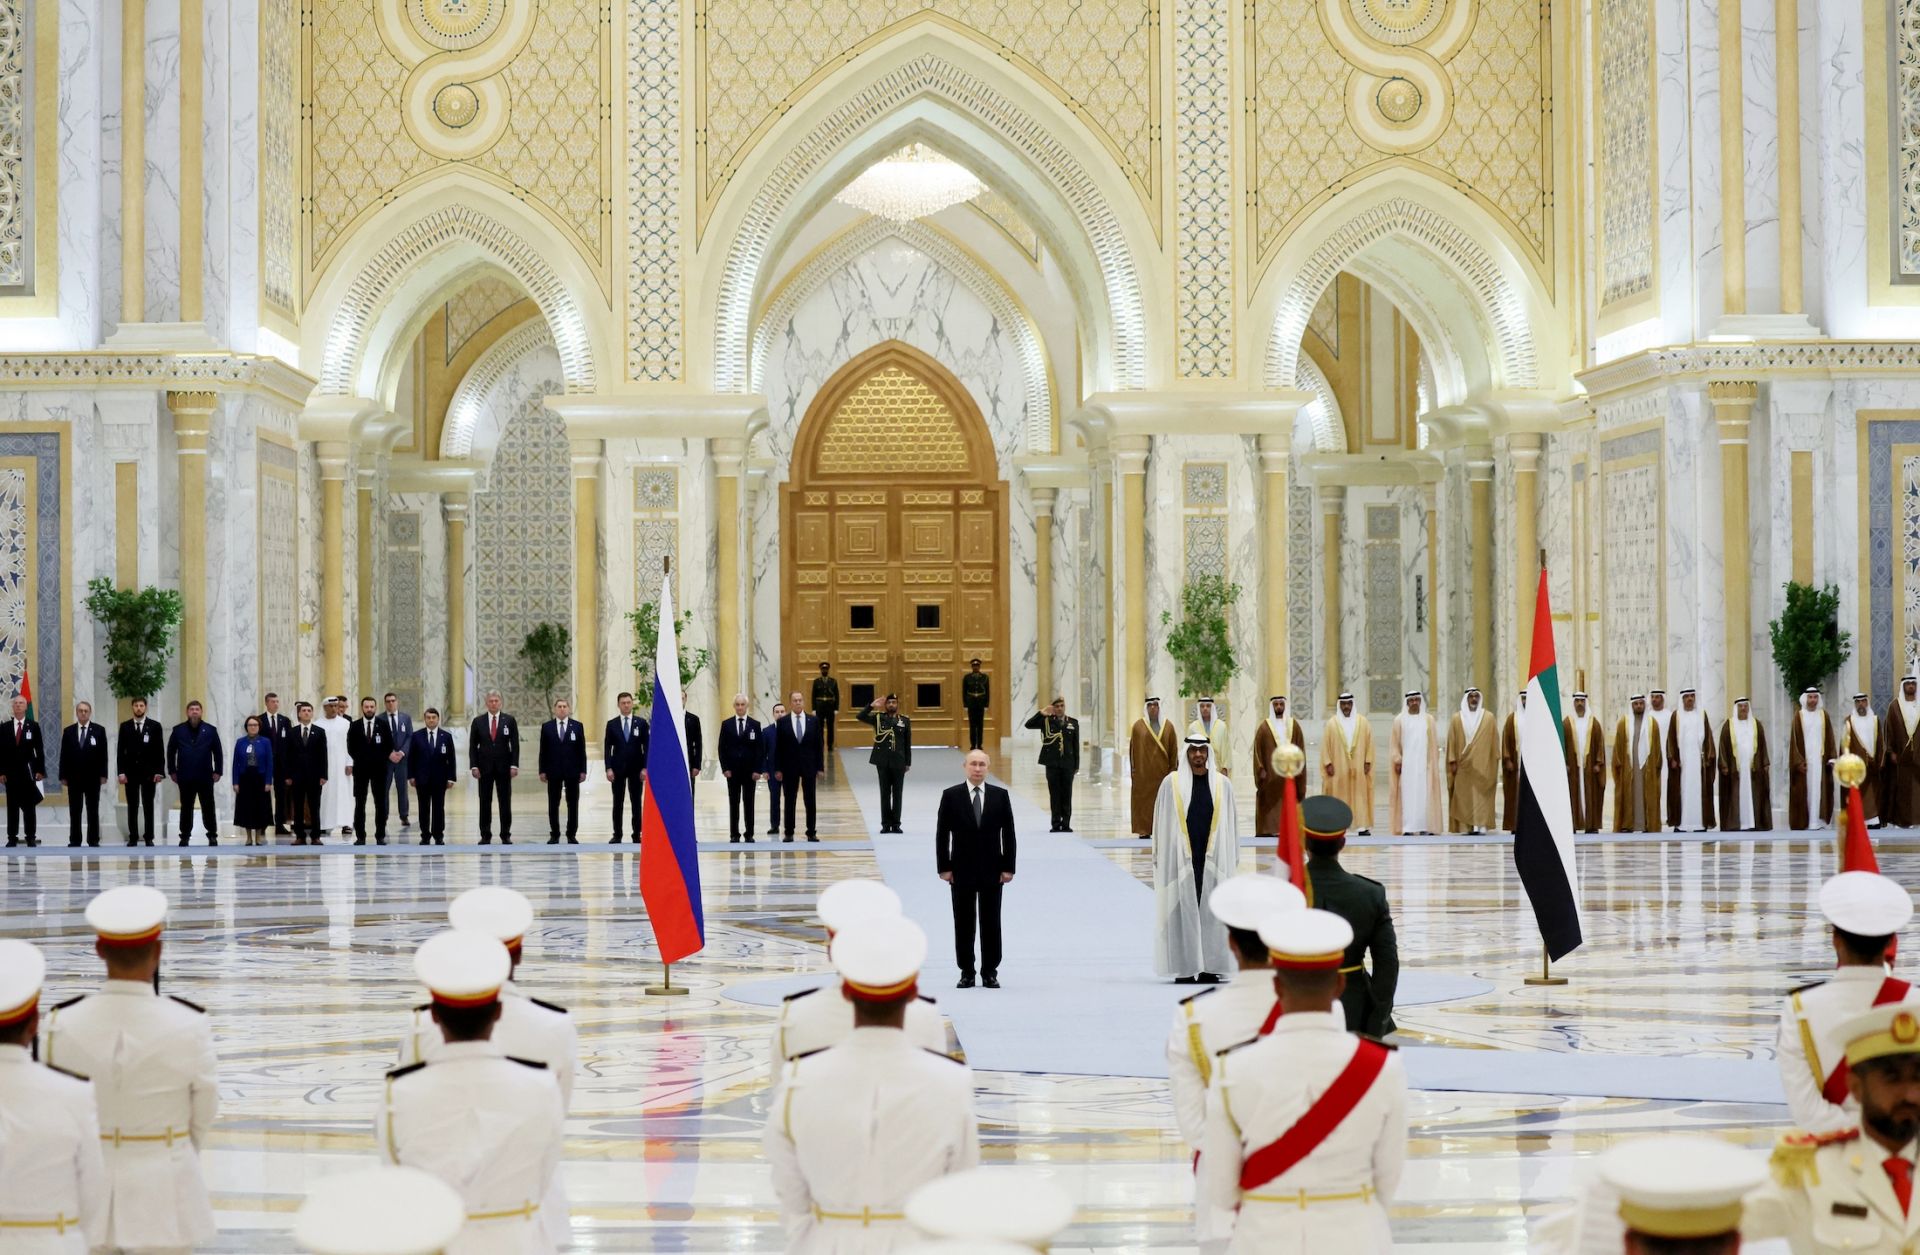 Russian President Vladimir Putin and UAE leader Sheikh Mohammed bin Zayed Al Nahyan attend a welcoming ceremony ahead of their talks in Abu Dhabi on Dec. 6, 2023.